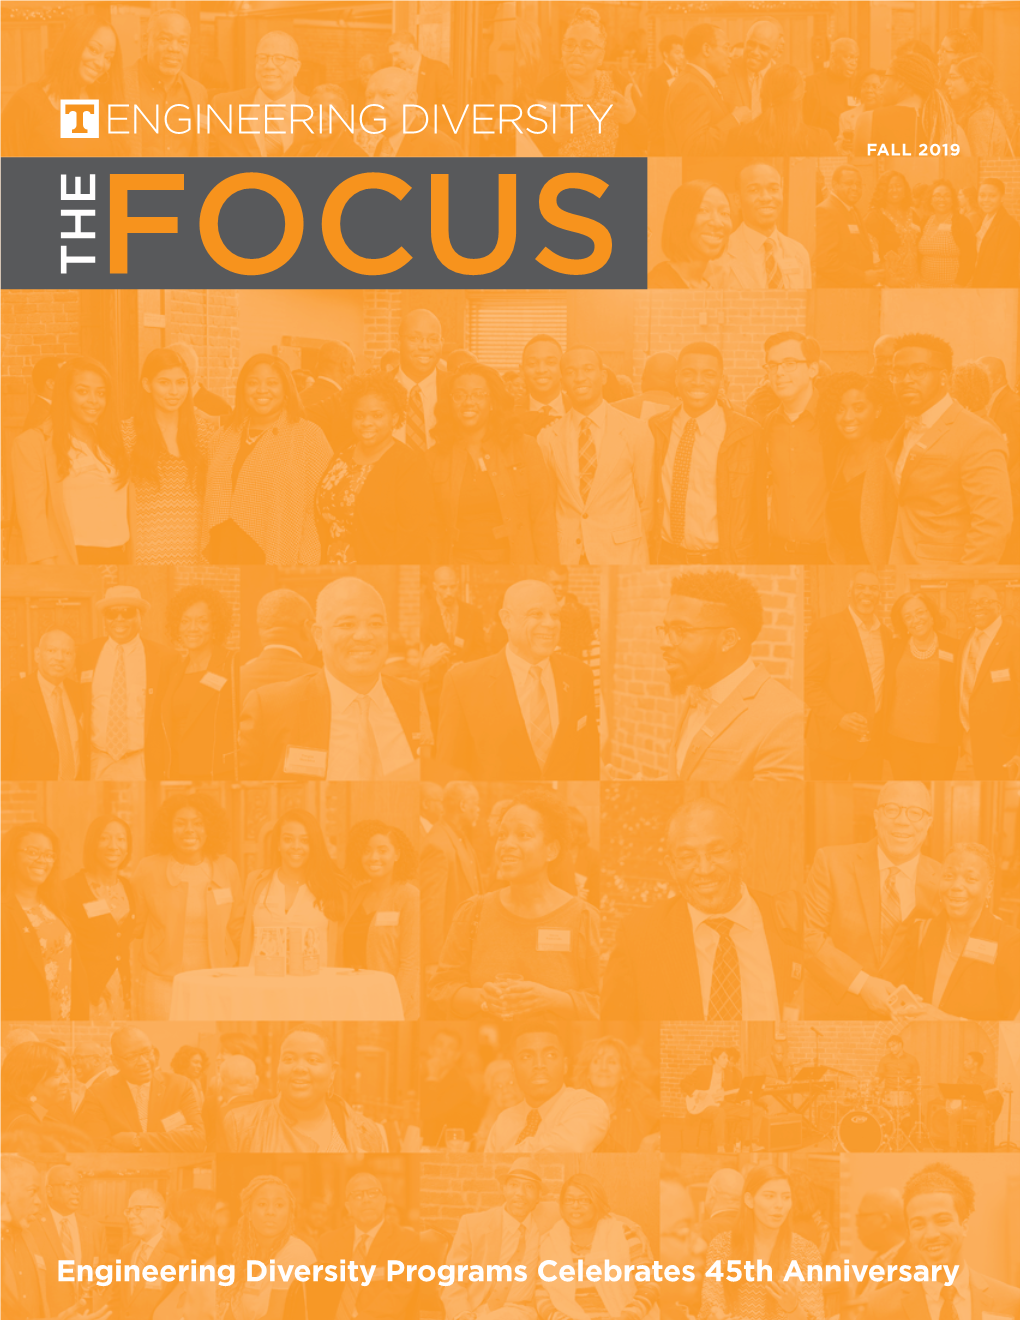 FOCUS Fall 2019 Issue